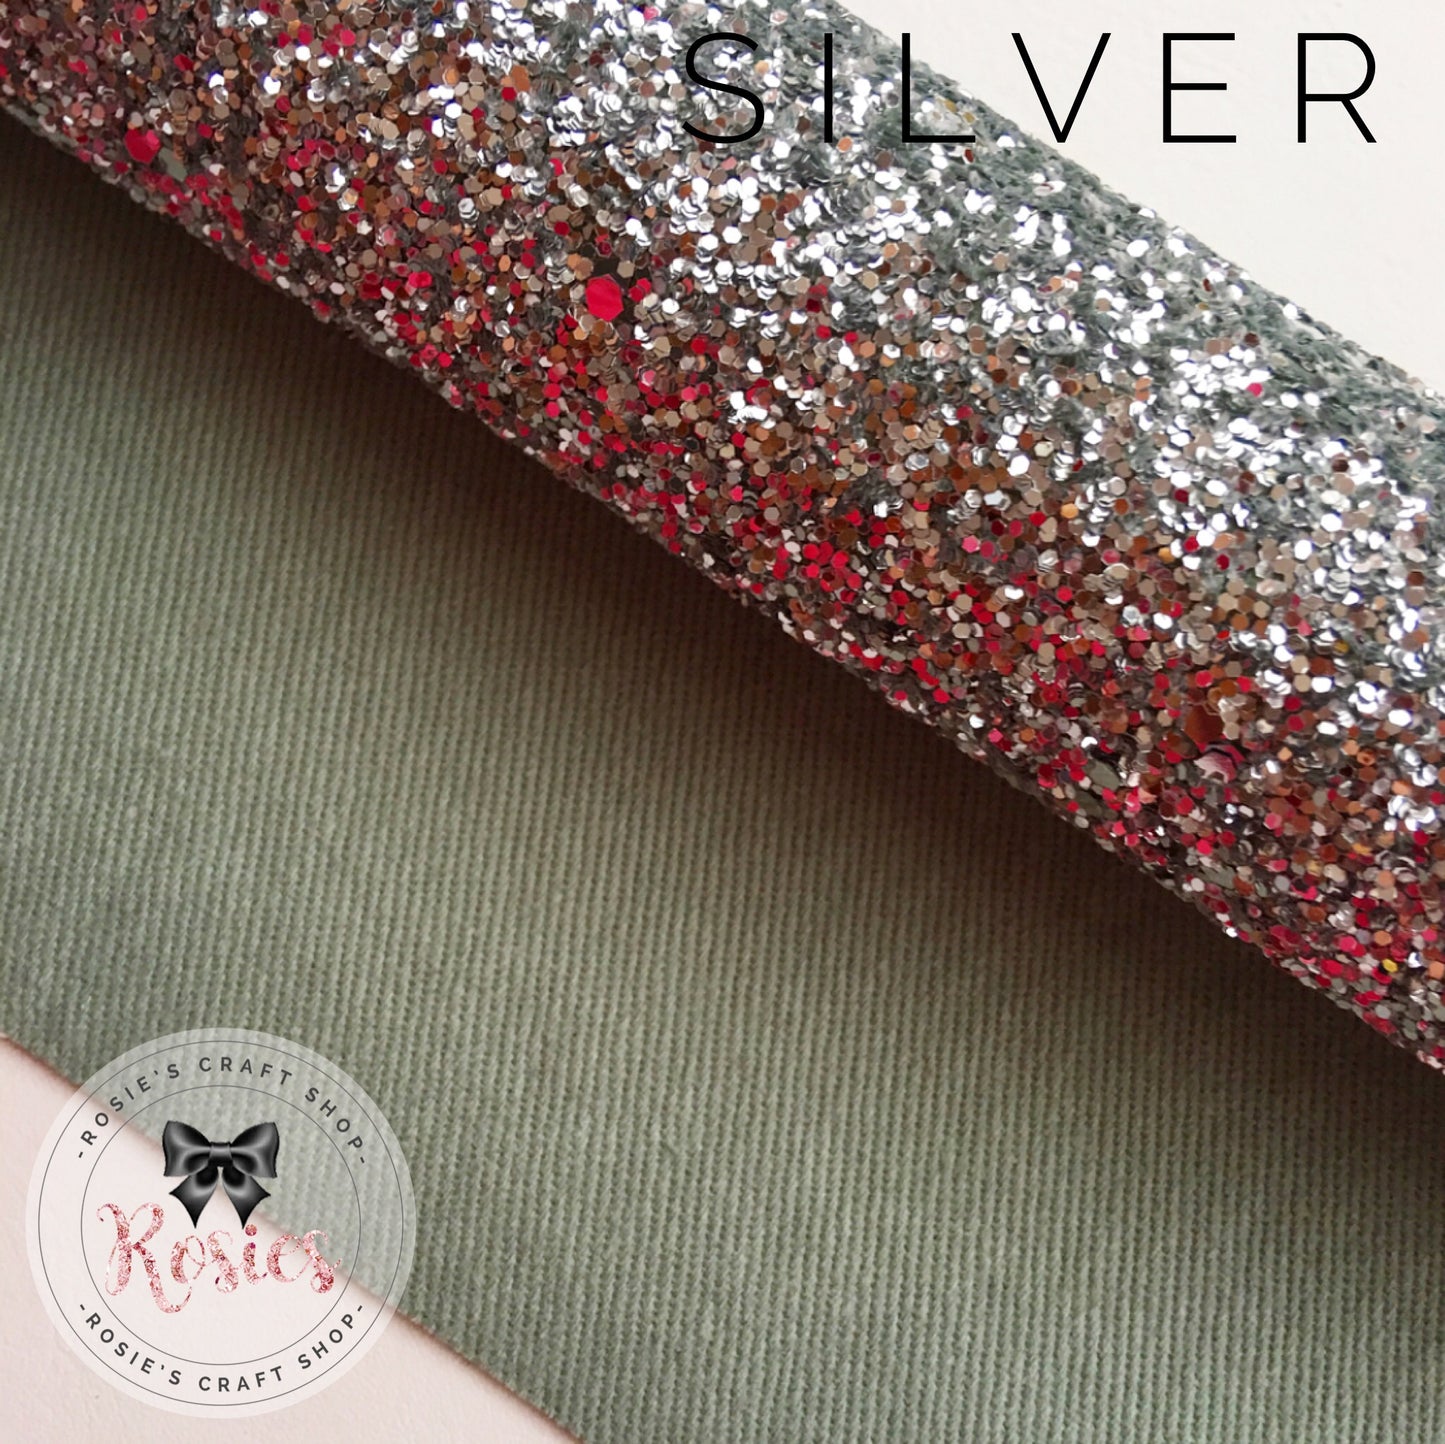 Silver Luxury Chunky Glitter Fabric - Classic Collection - Rosie's Craft Shop Ltd